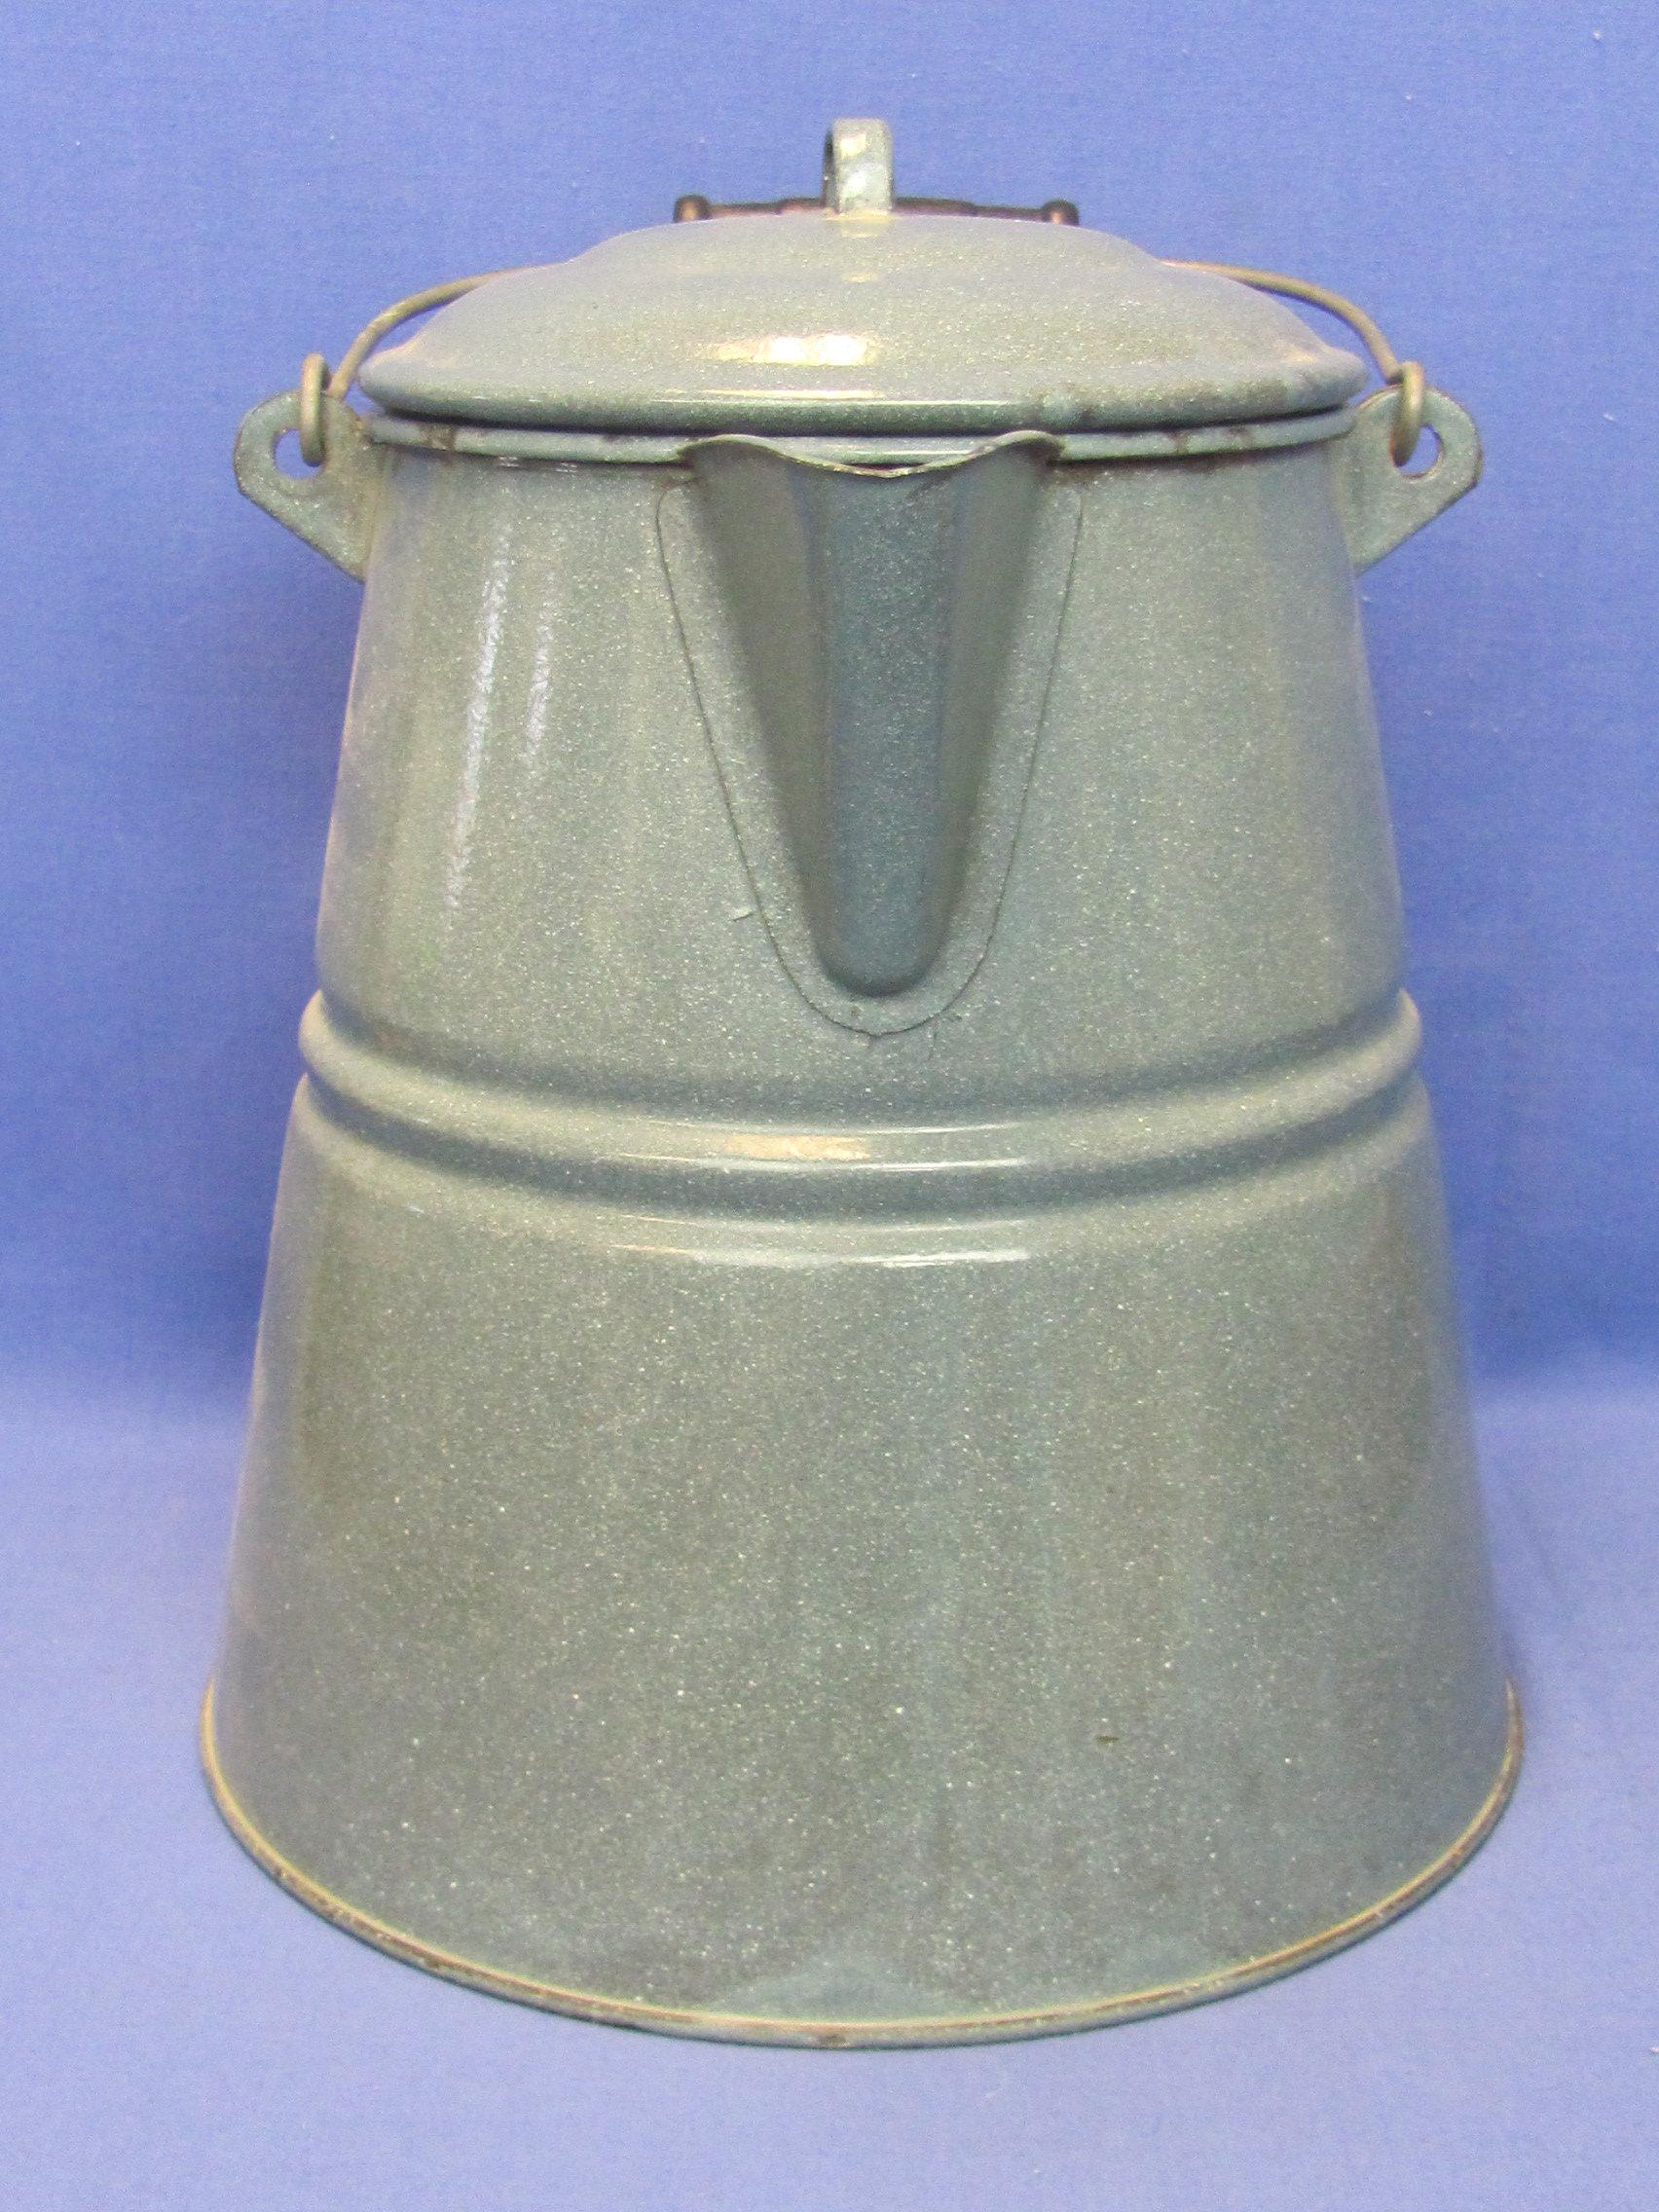 Large Grey Enamel Camping Coffee Pot – Wood Handle – 12” tall – Very good condition